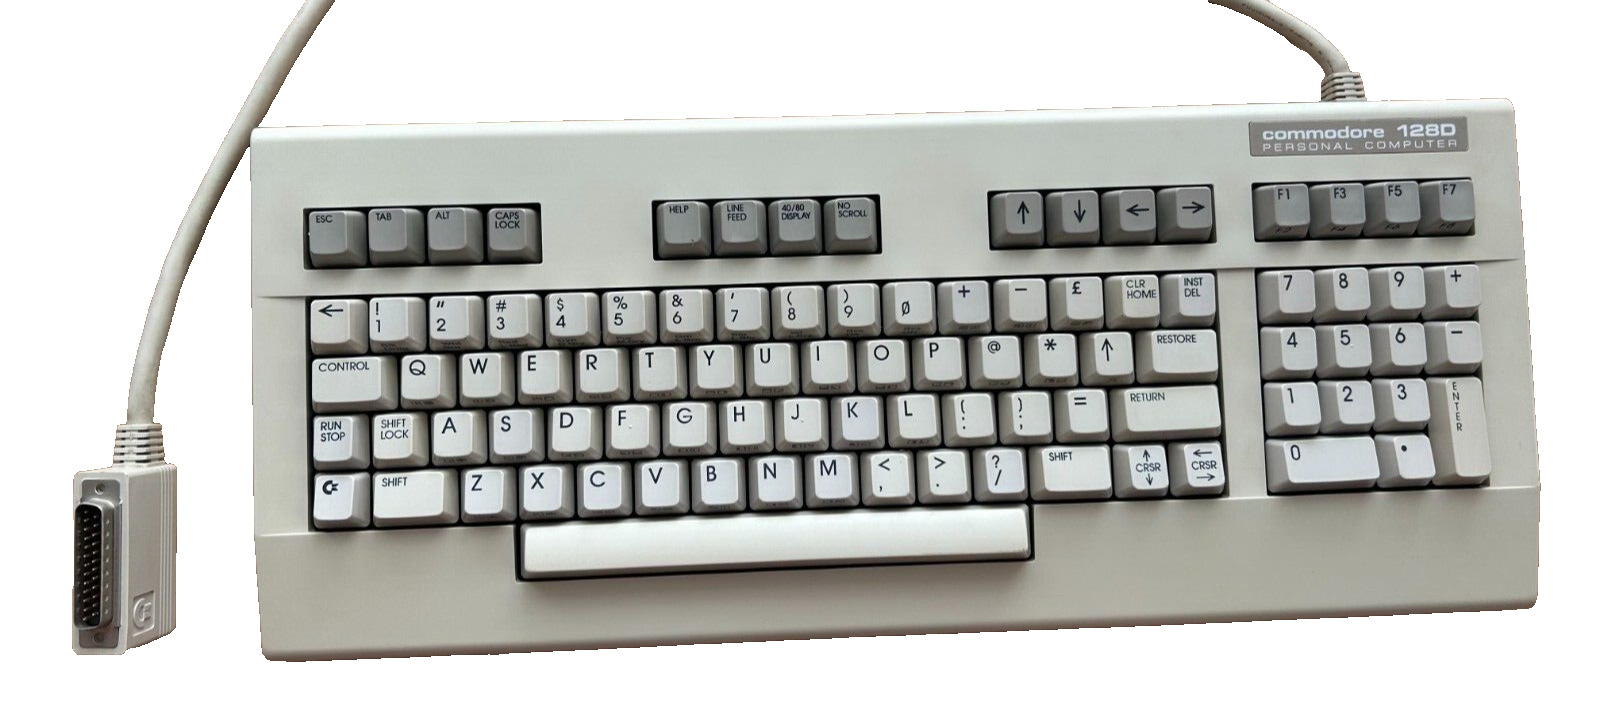 Commodore 128 D keyboard. Tested